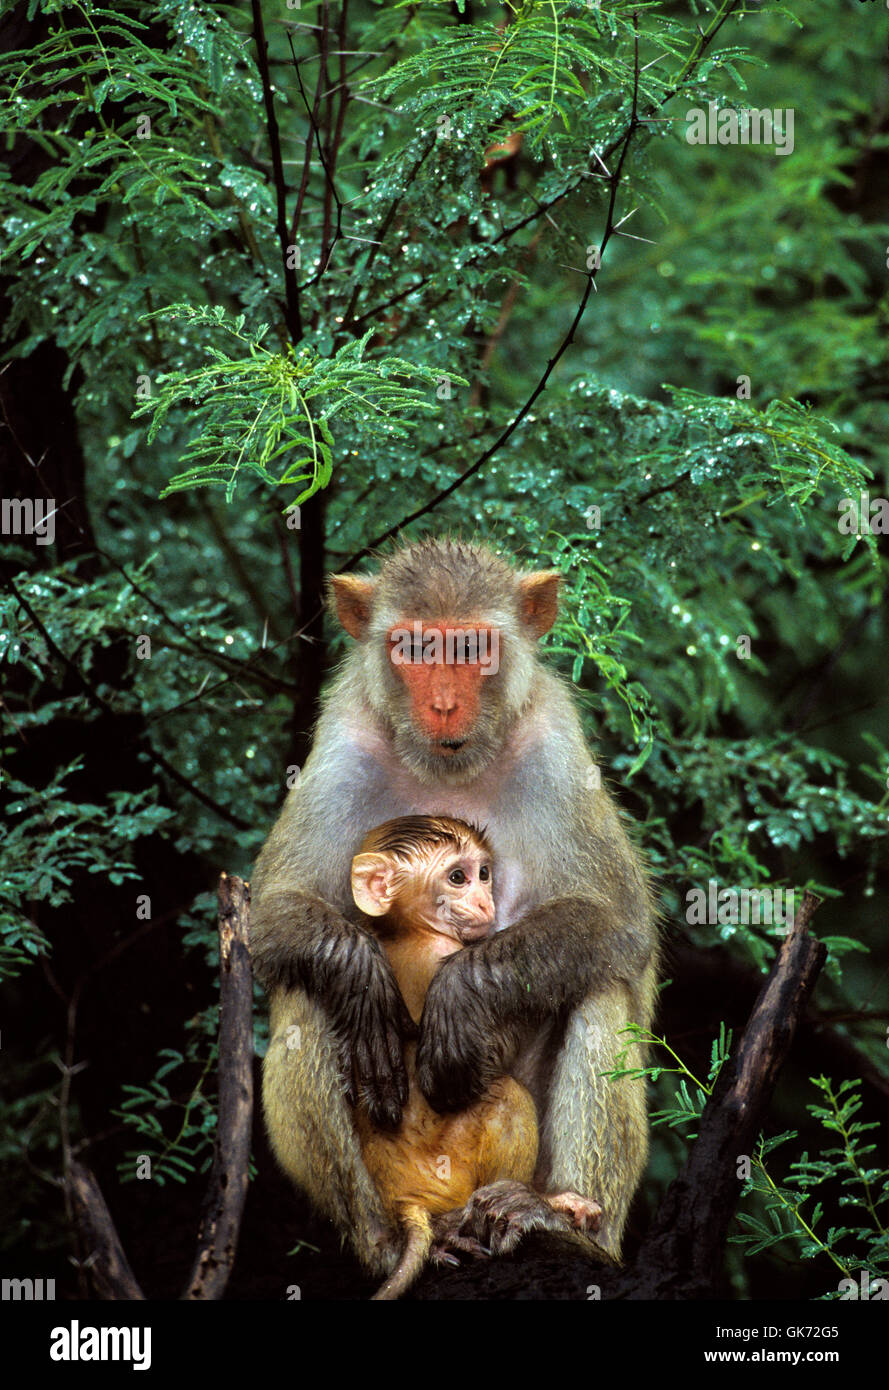 Rhesus macaque, Macaca mulatta, infant with mother in tree, Rajasthan, India Stock Photo